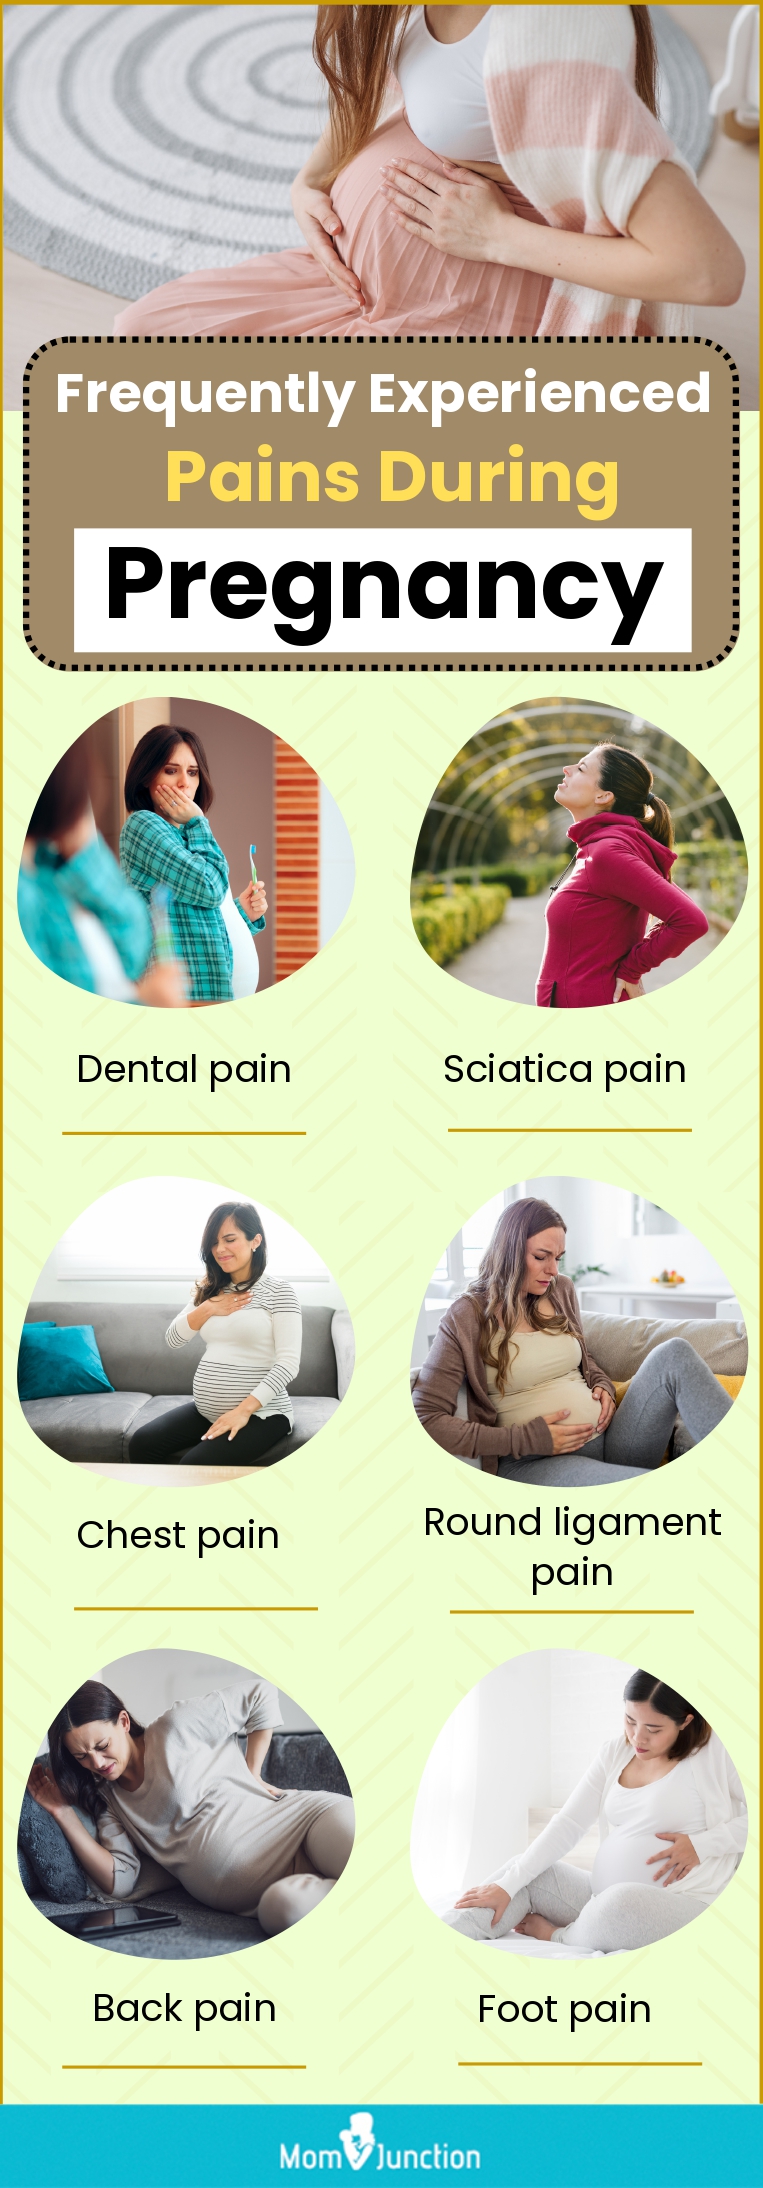 frequently experienced pains during pregnancy (infographic)